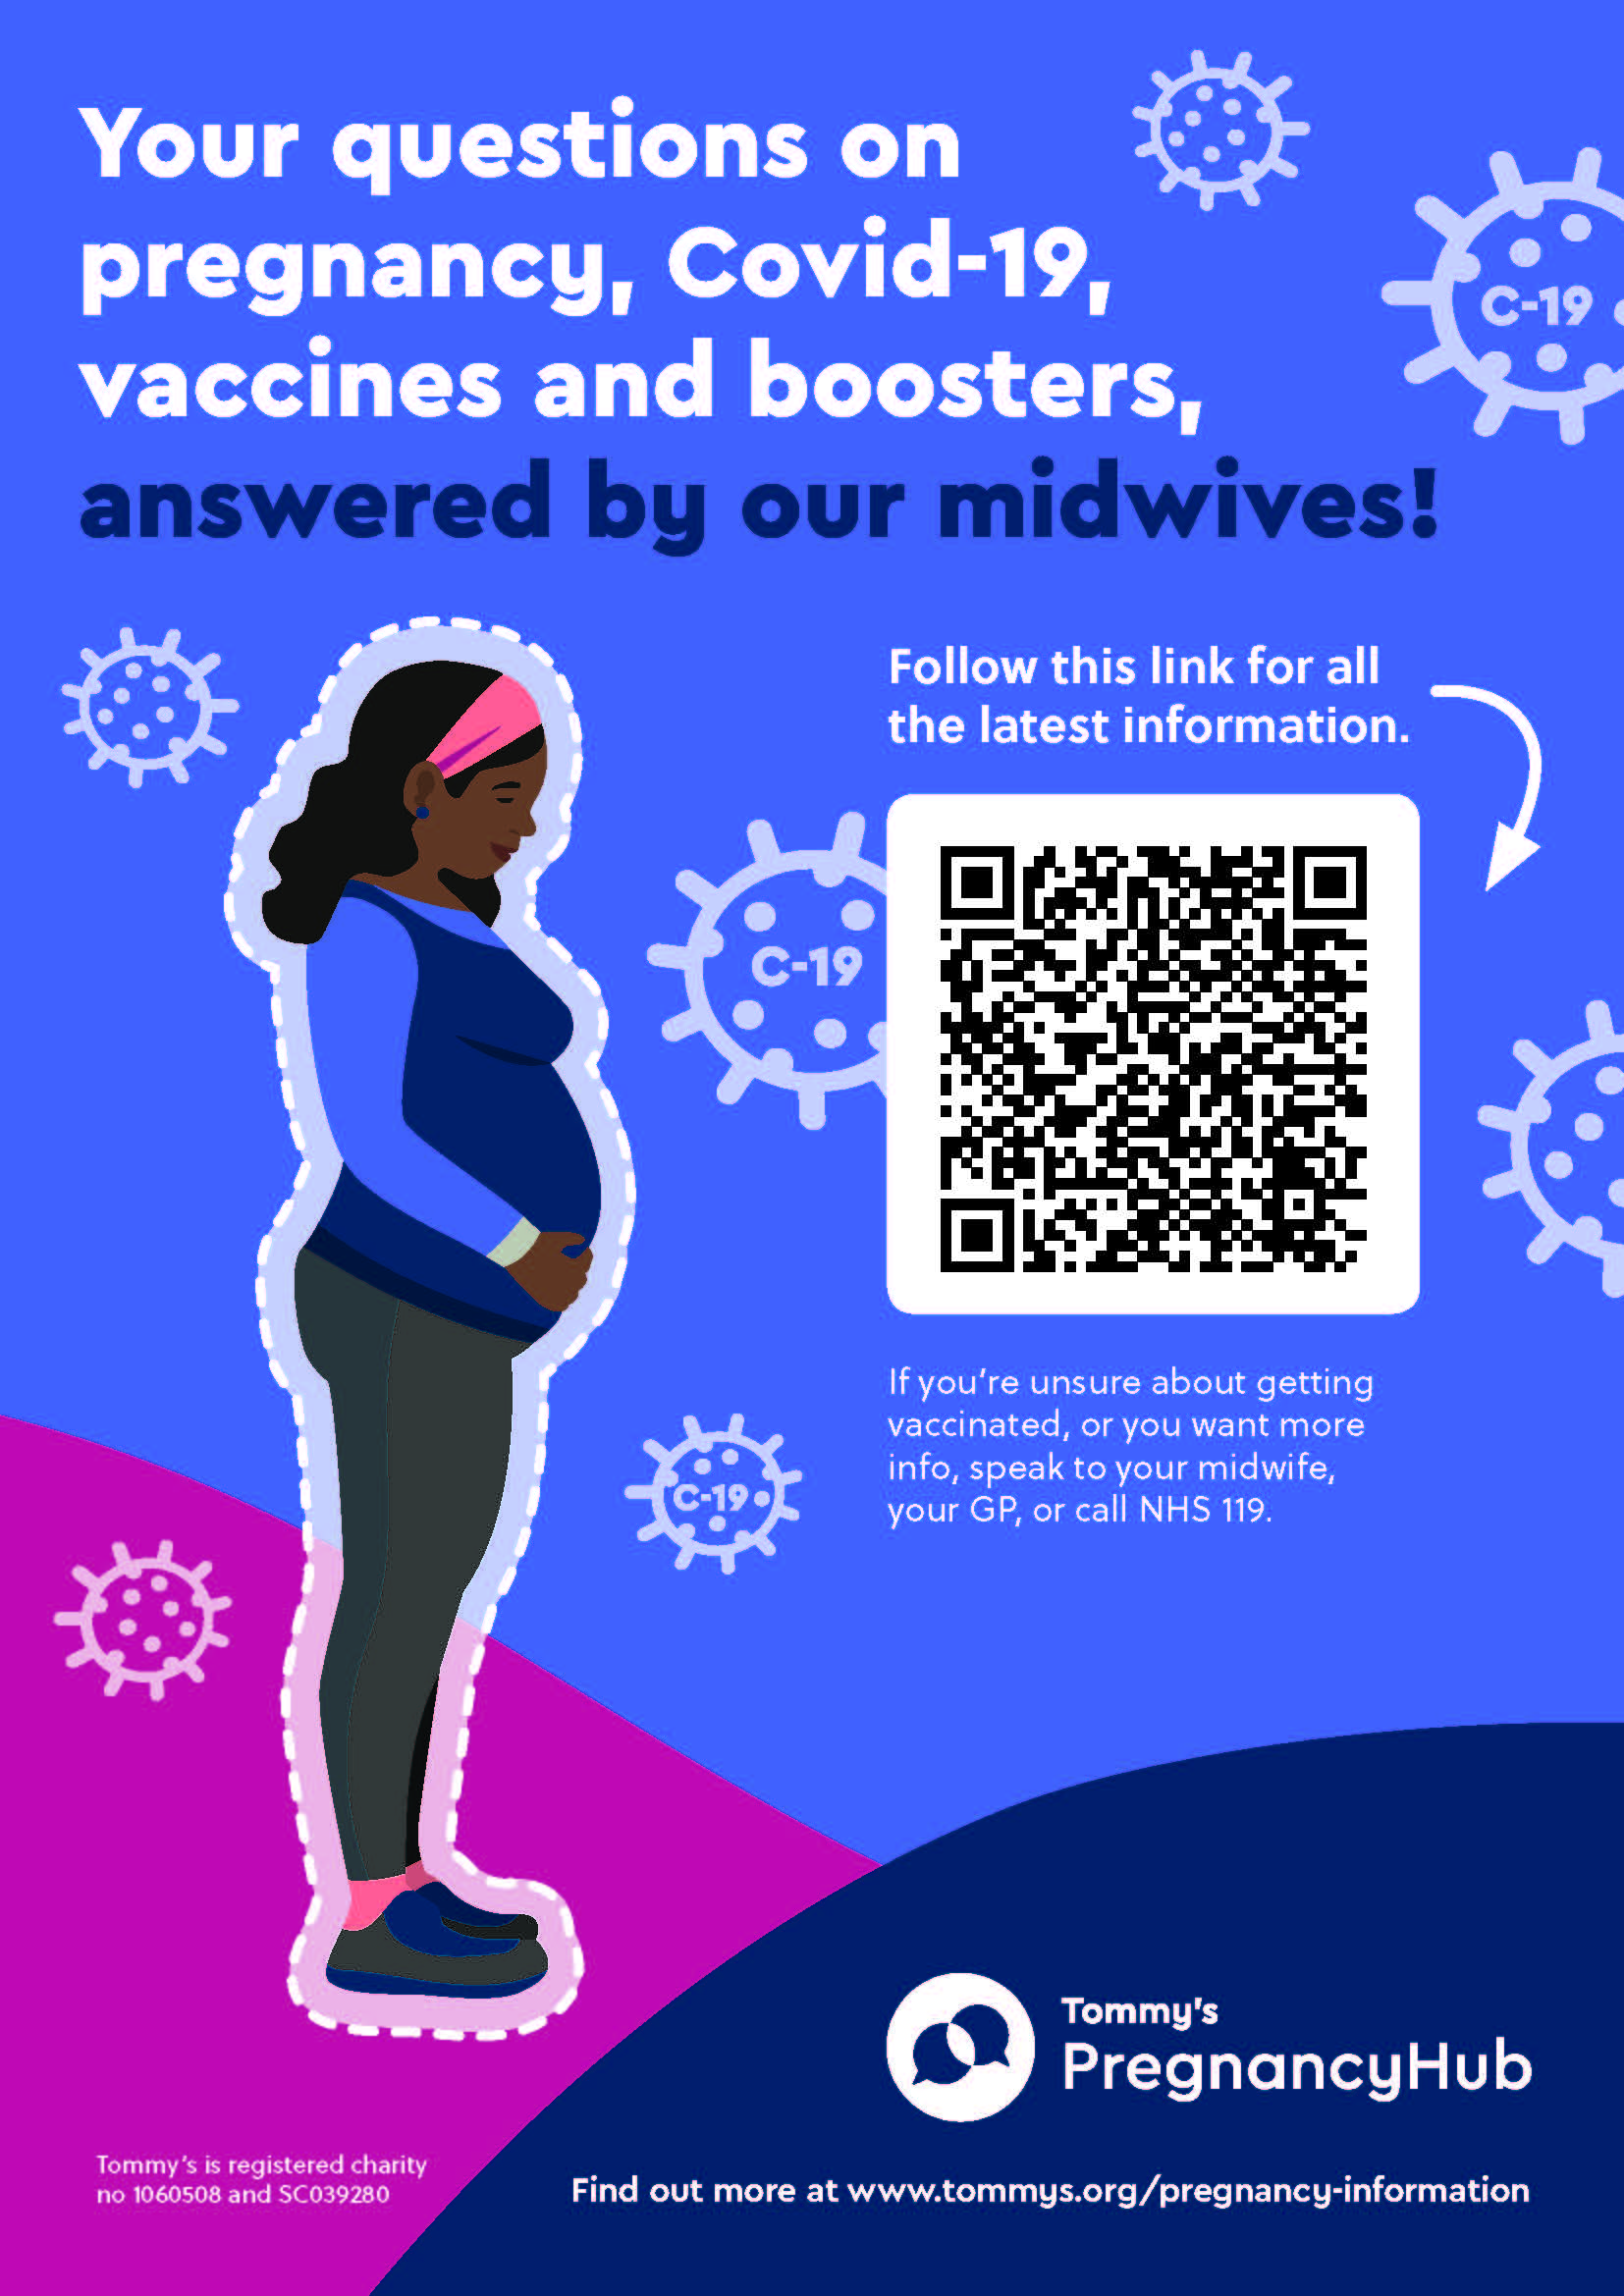 A pregnant woman holding her bump, with text saying your questions on pregnancy, Covid-19, vaccines and boosters, answered by our midwives. There is a QR link to follow for all the latest information. 